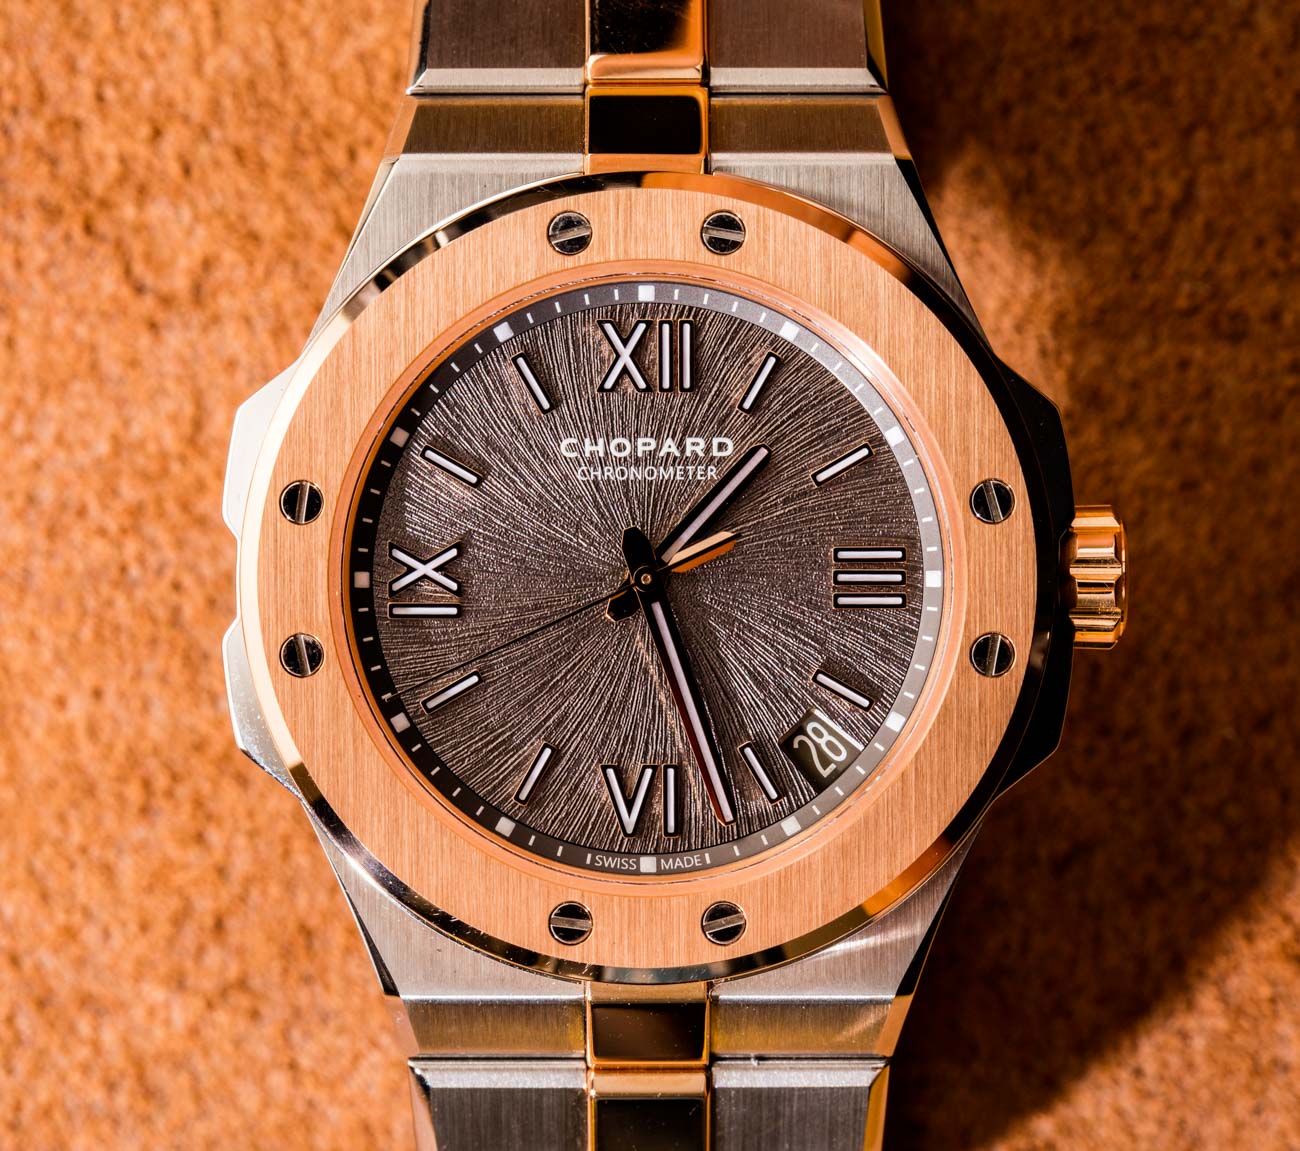 Alpine Eagle Large Automatic 41mm Lucent Steel and 18-Karat Rose Gold  Watch, Ref. No. 298600-6001